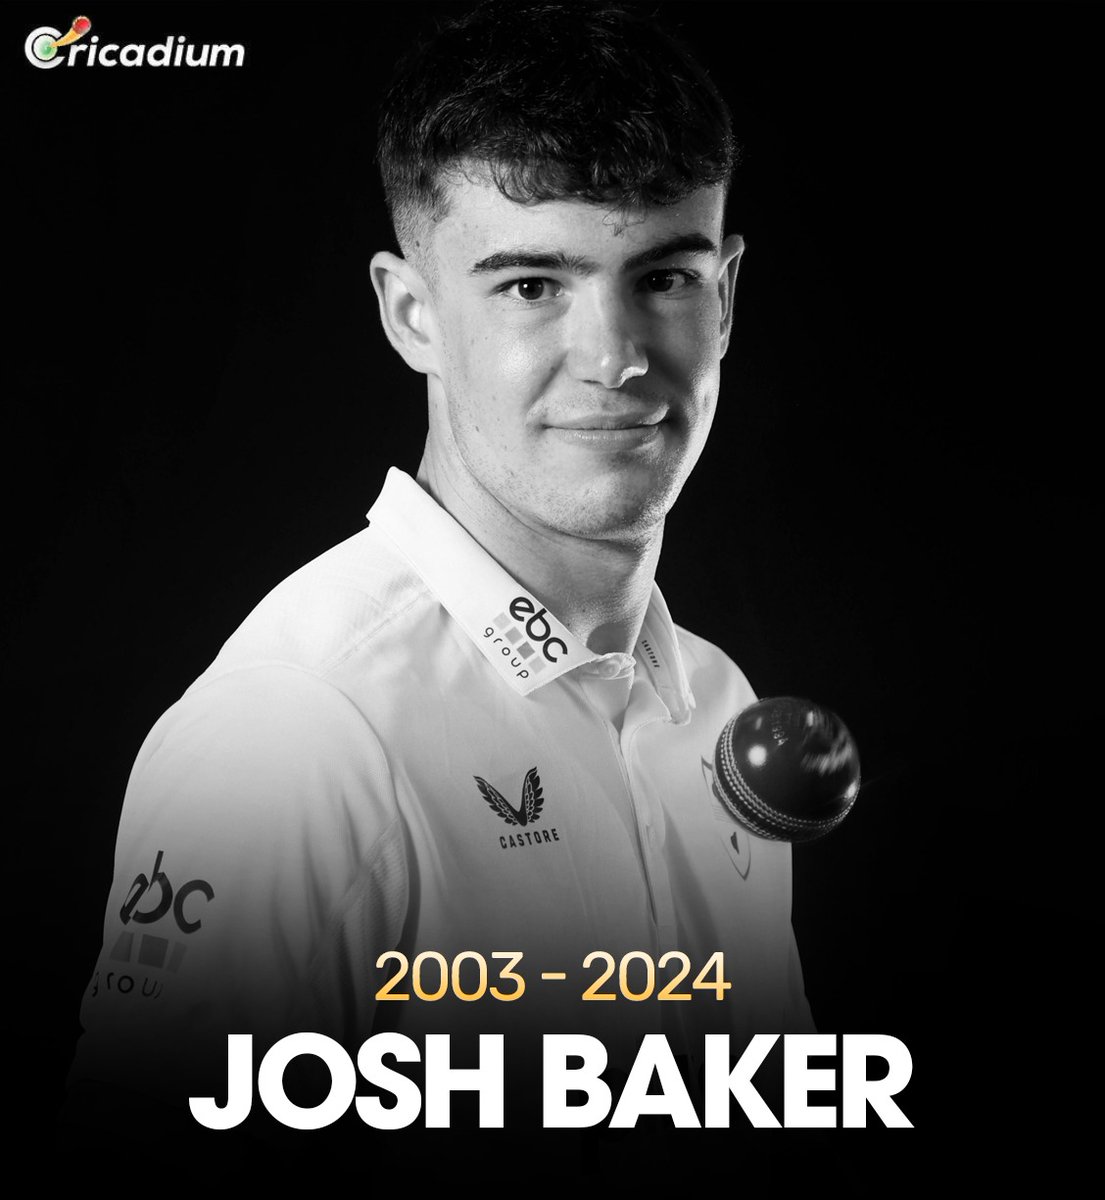 Josh Baker, the left-arm spinner from Worcestershire, has sadly passed away at only 20 years old. Our deepest condolences with his family RIP 💔 #JoshBaker #RIP #England